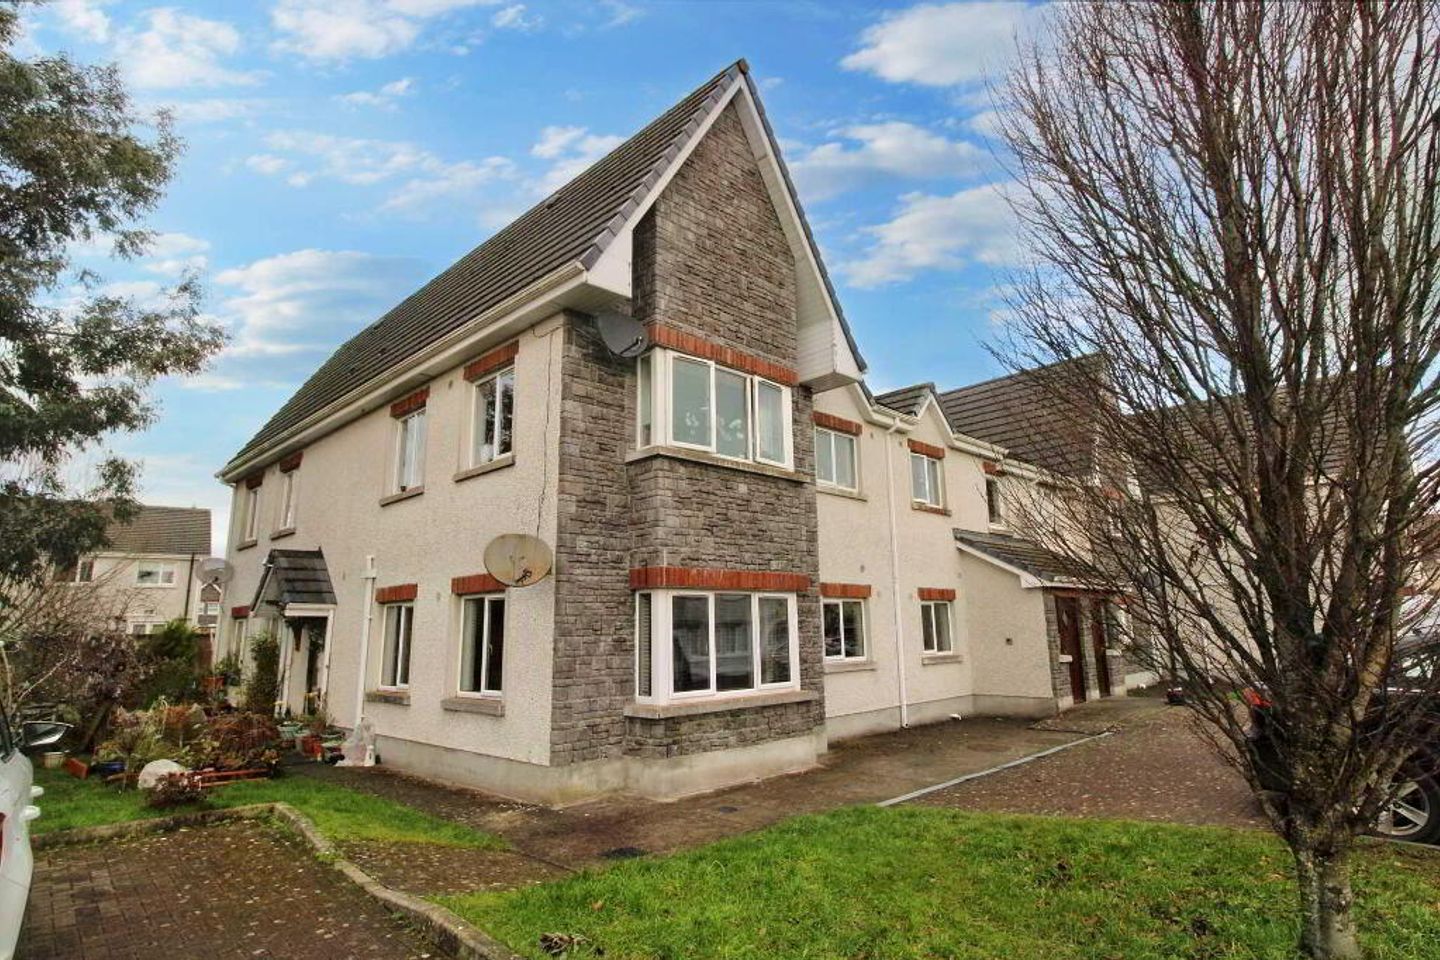 243a Coille Bheithe, St. Conlons Road, Nenagh, Co. Tipperary